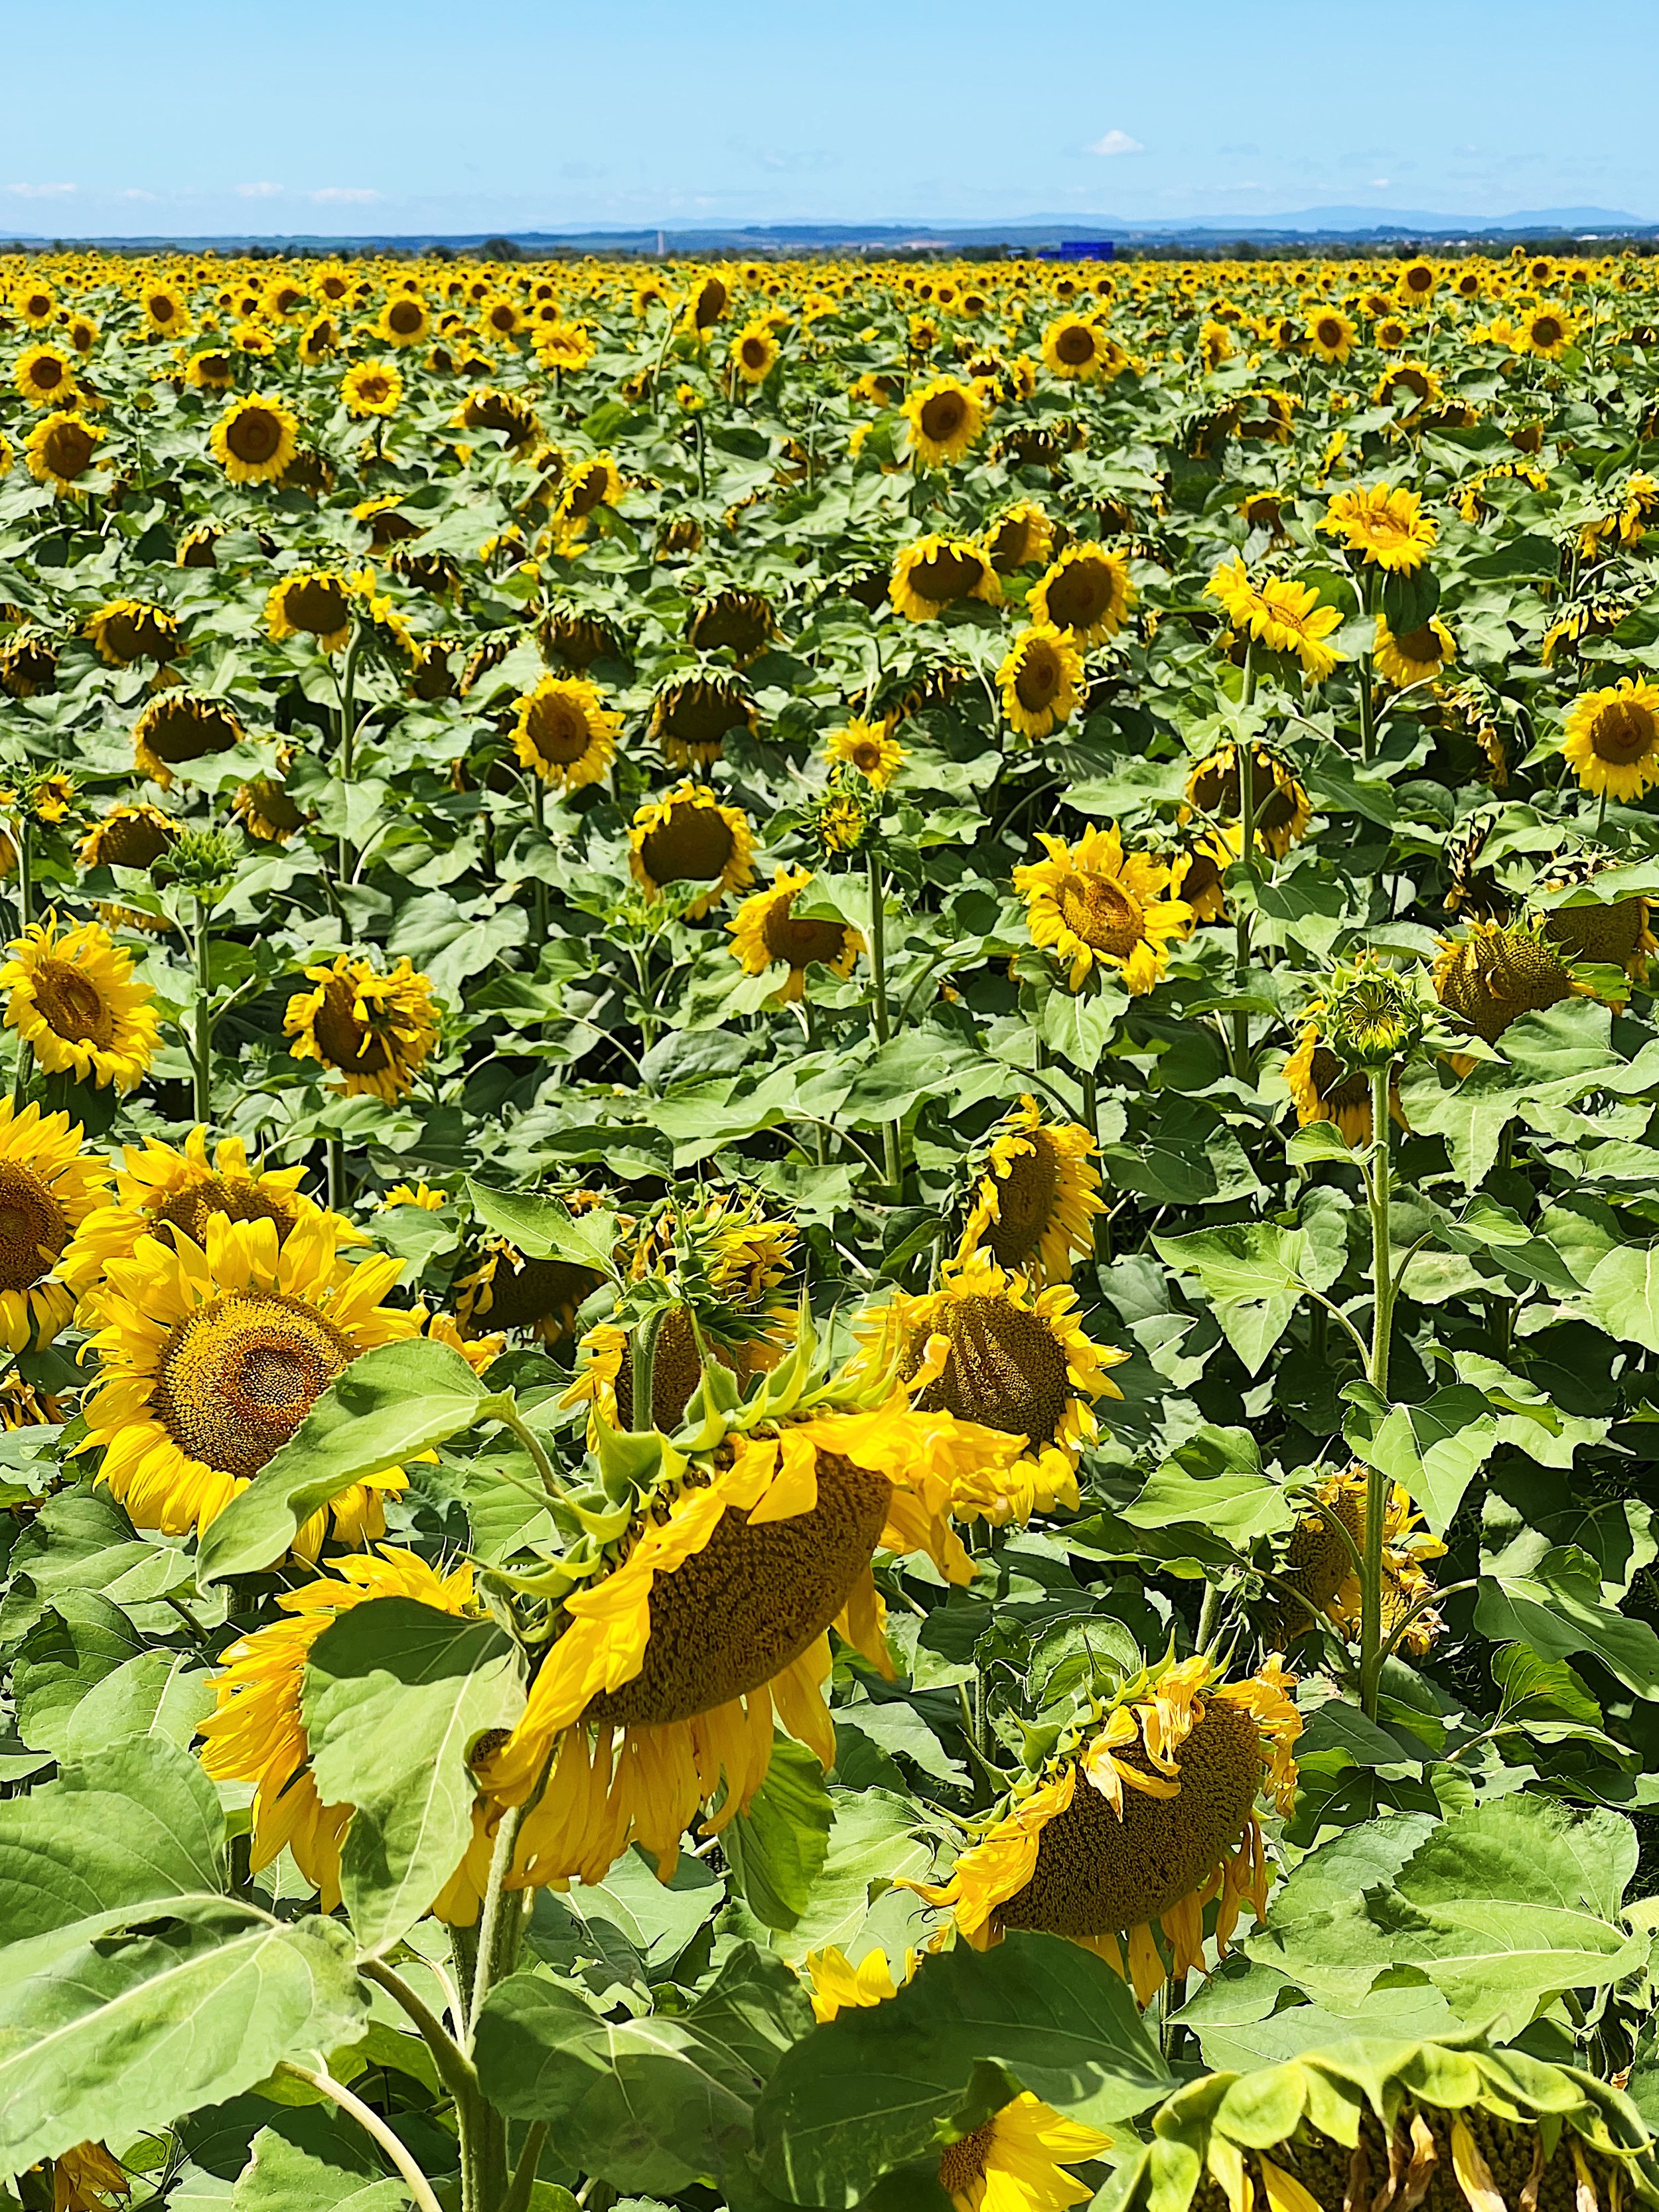 Sunflowers in Arles, France